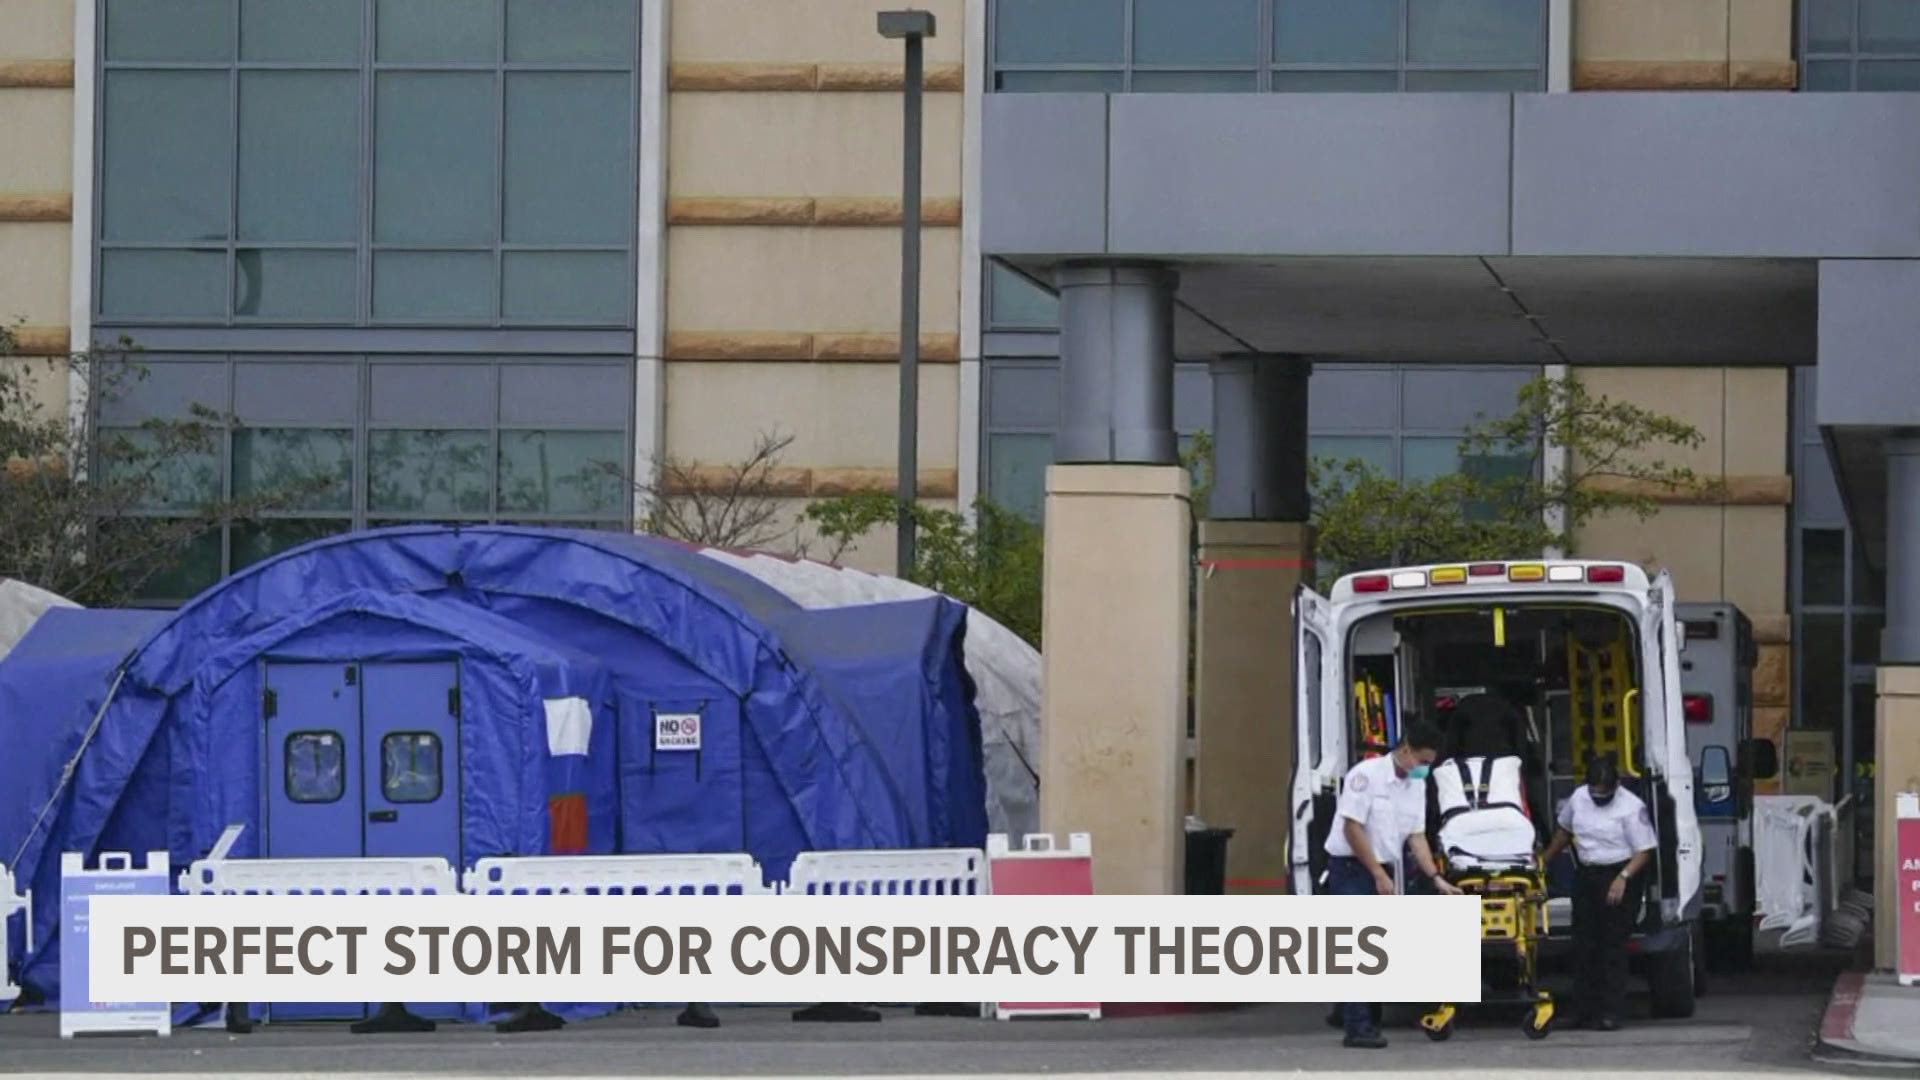 Local 5's Sarah Beckman breaks down how QAnon's movement is unique in "Conspiracy Theory Casualties: Personal consequences of false information."